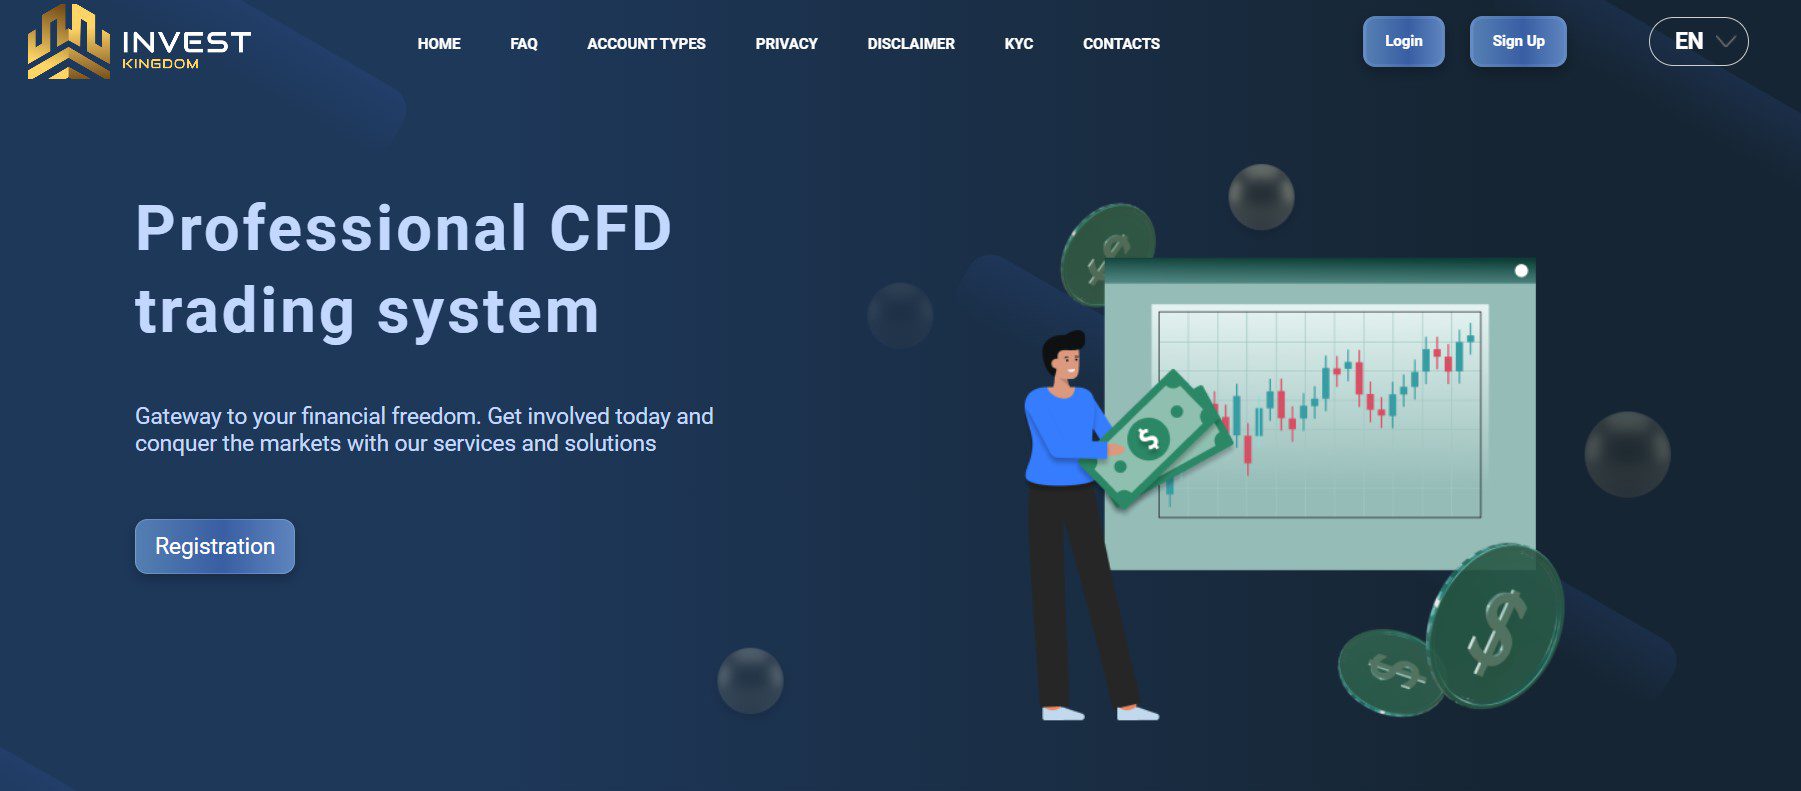 CFD Invest kingdom CO